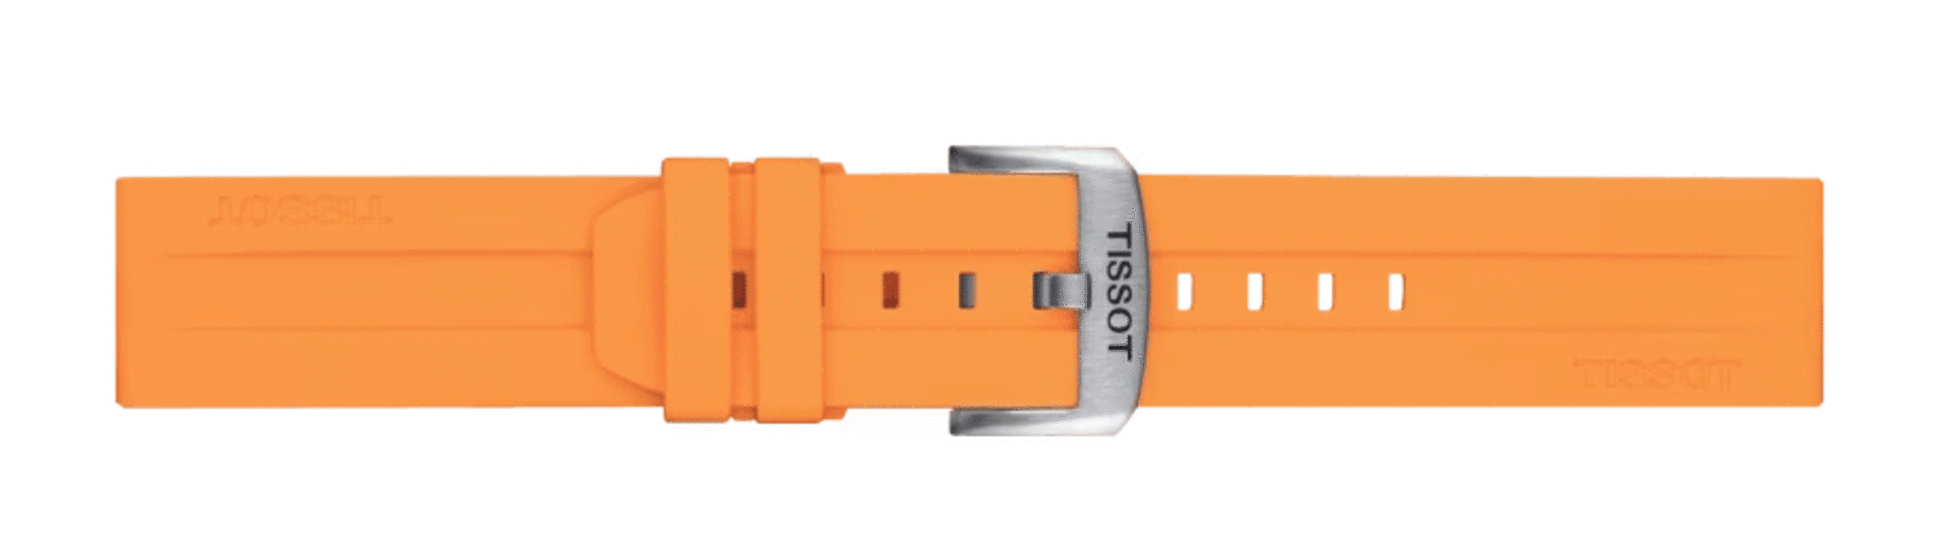 TISSOT OFFICIAL ORANGE SILICONE STRAP LUGS 22 MM T852.047.918